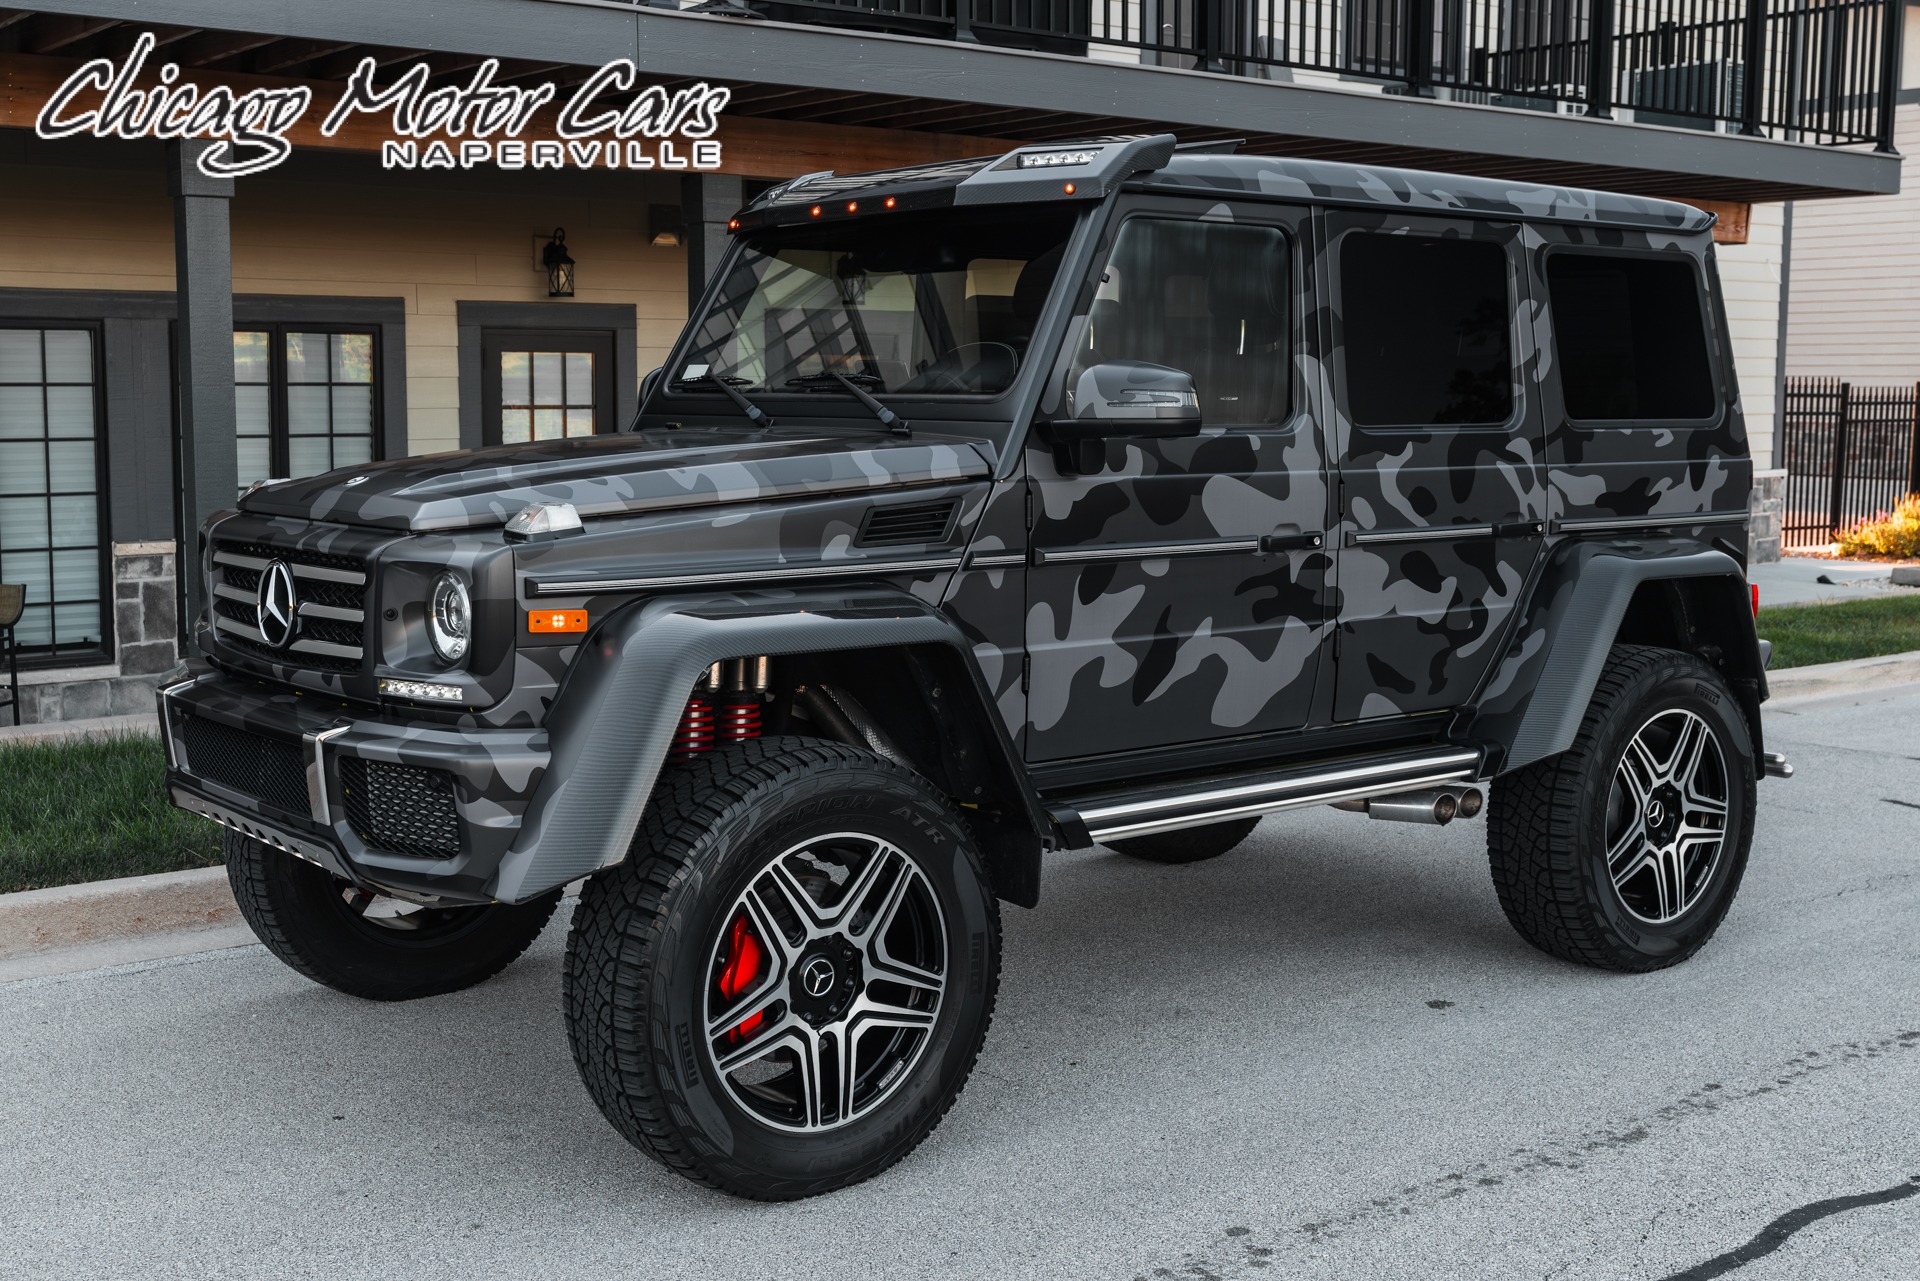 Used-2017-Mercedes-Benz-G550-4x4-Squared-SUV-LOW-Miles-Electric-Beam-Paint-Custom-Camo-Wrap-1-of-300